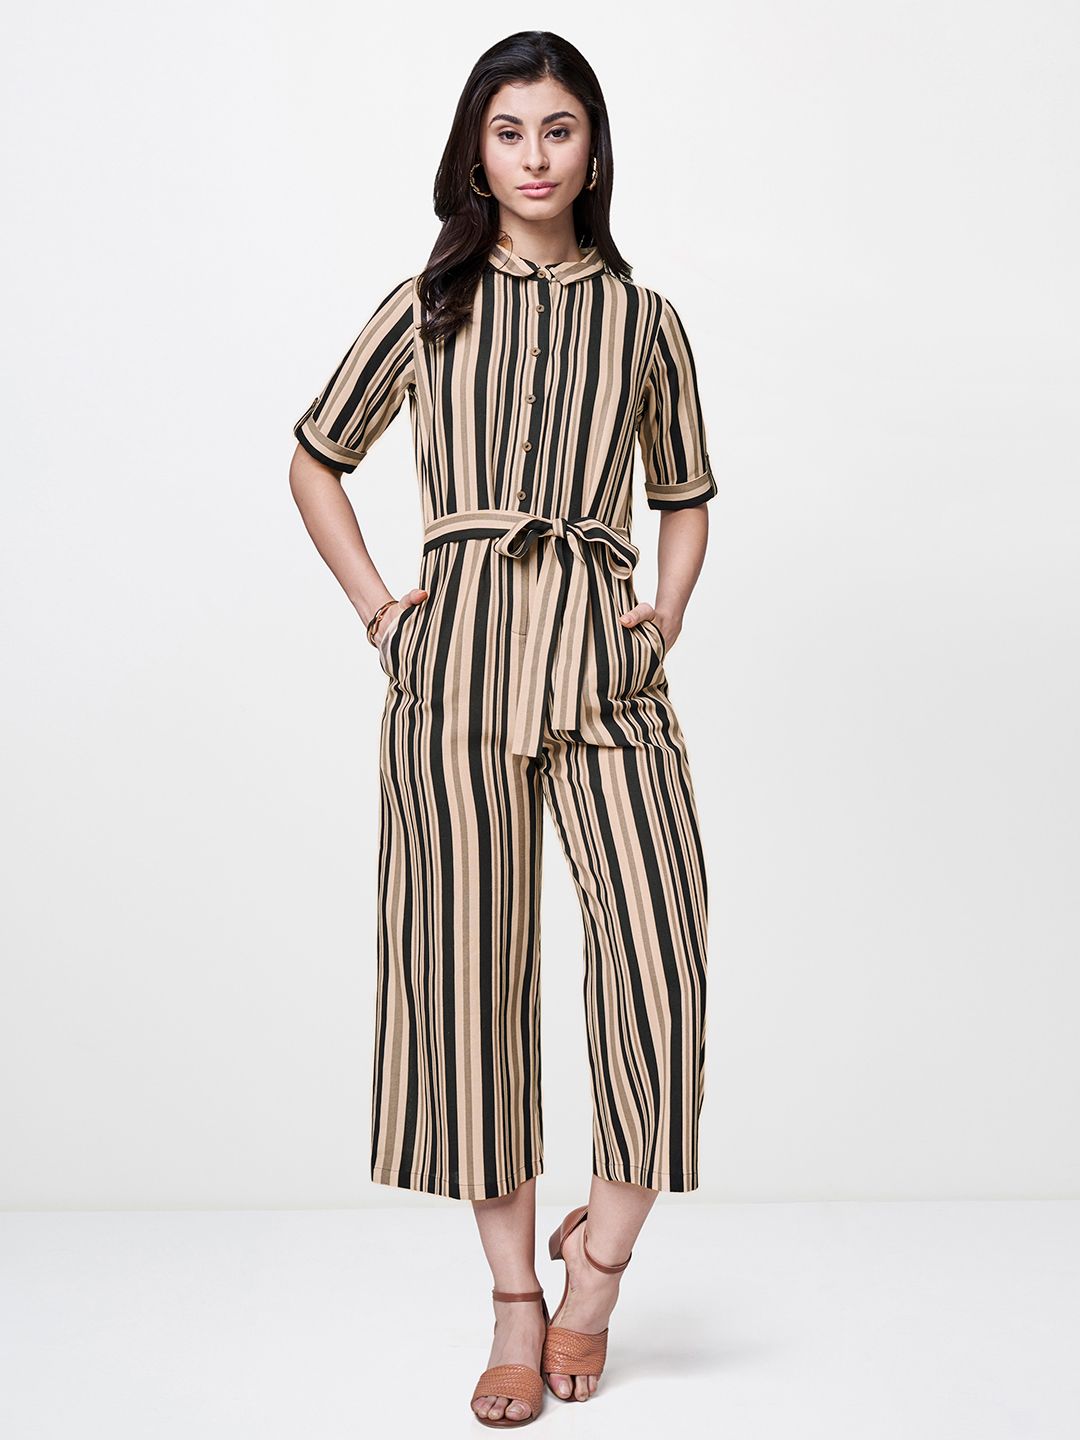 AND Women Beige & Black Striped Culotte Jumpsuit with Waist Tie-Ups Price in India